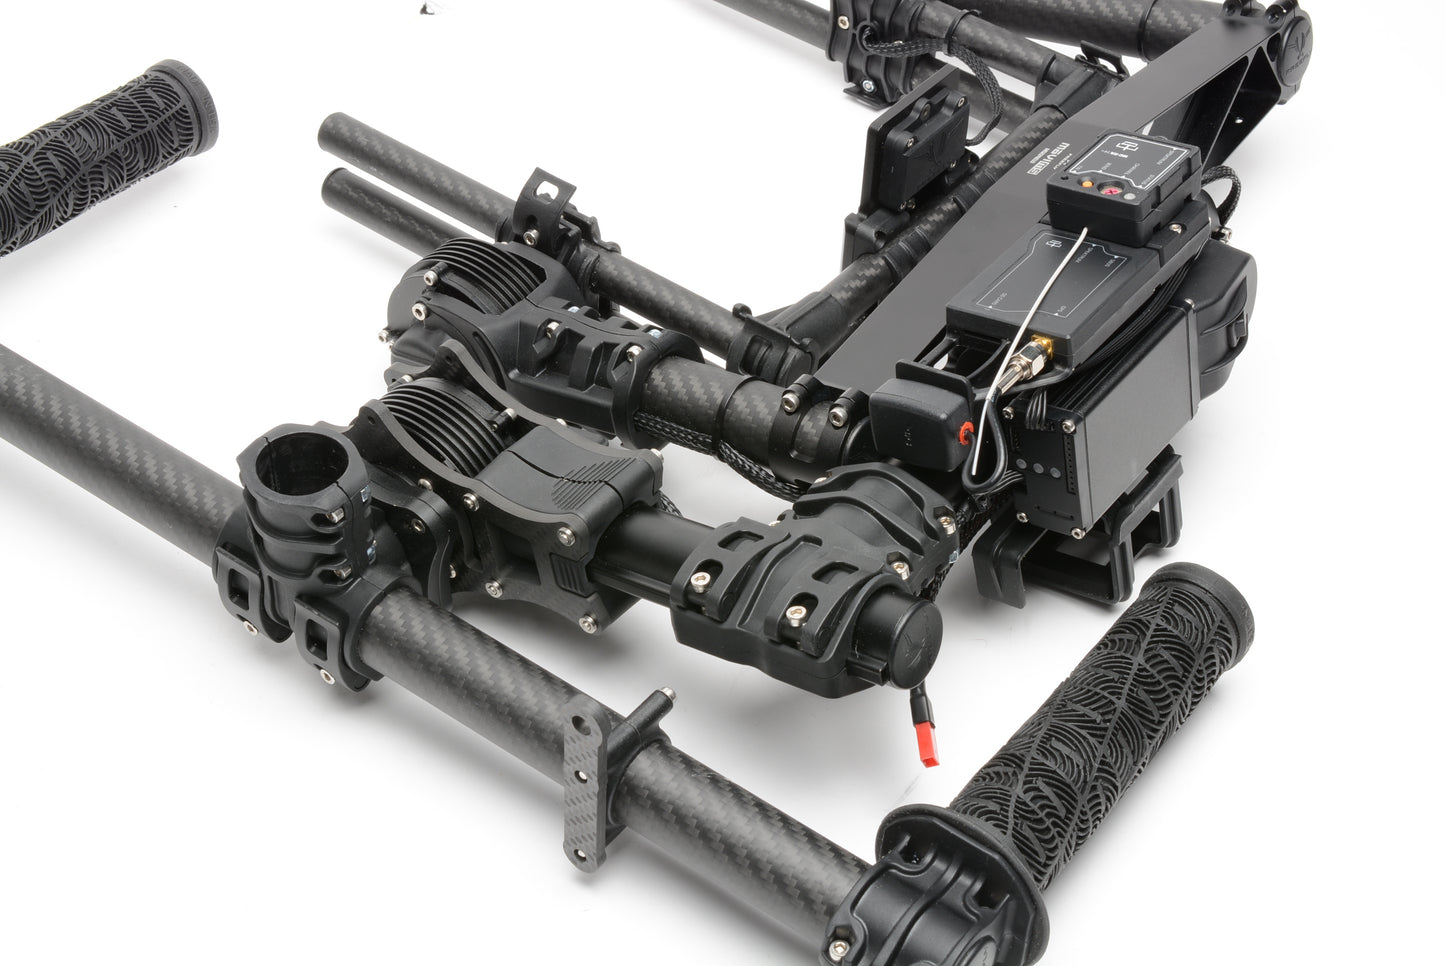 Freefly Movi M5 Pro Gimbal, Hard Case, 2X Batteries, Ninja Star, tested, very gently used